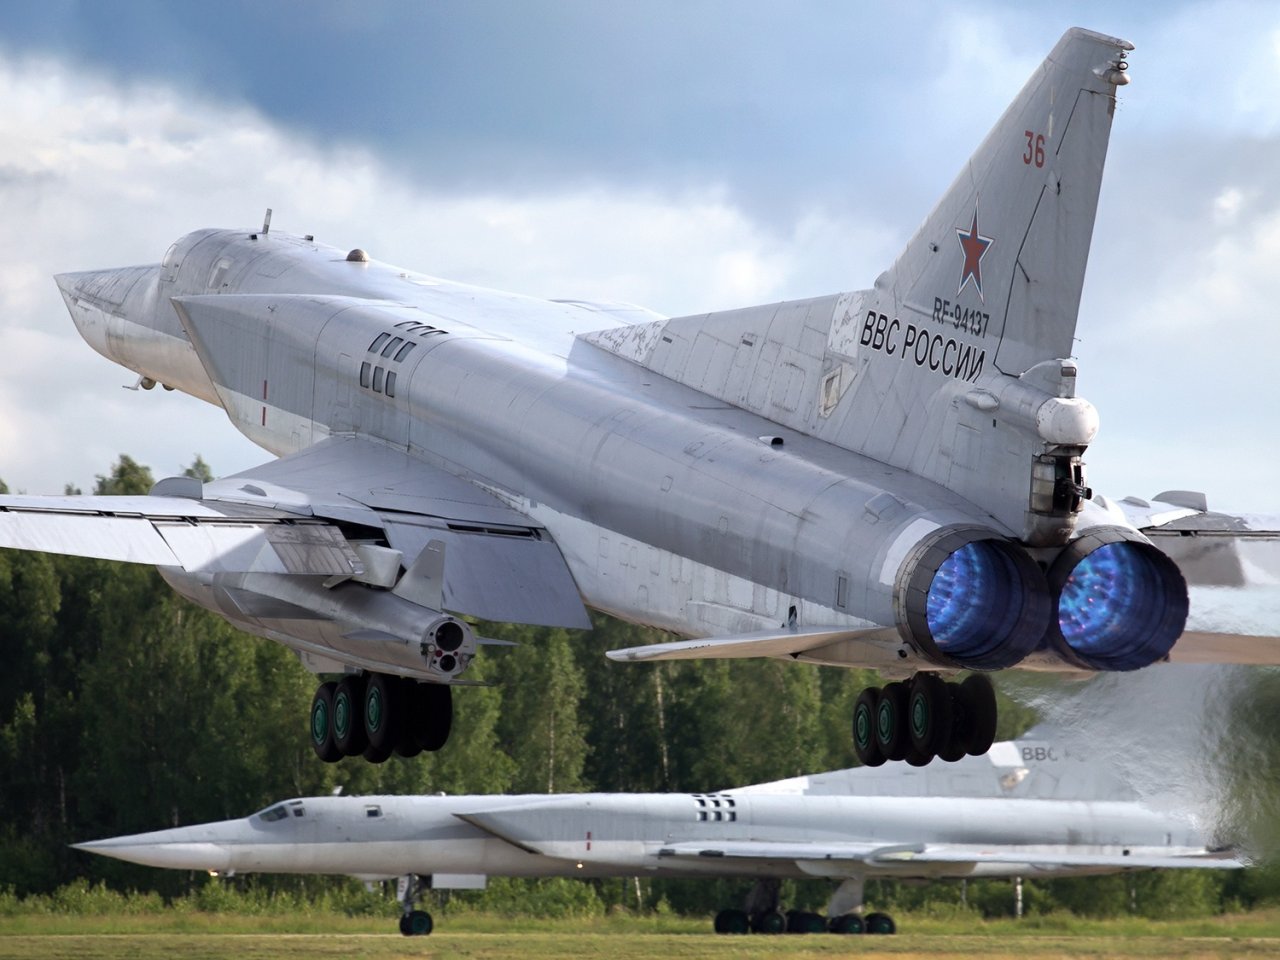 Meet Russia's 'New' Tu-22M3 Backfire Bomber: An Old Design Made Super  Deadly | The National Interest